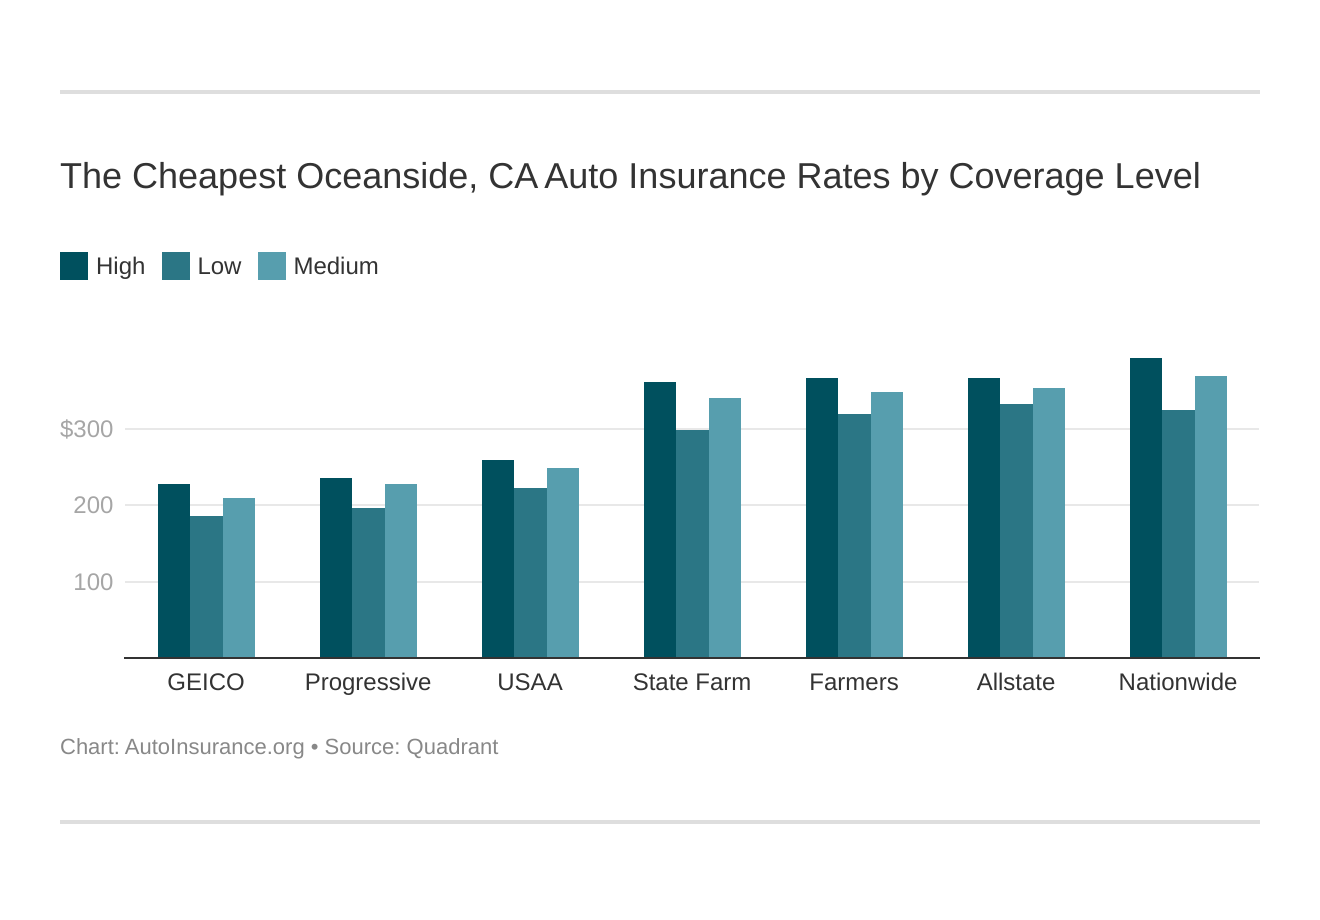 The Cheapest Oceanside, CA Auto Insurance Rates by Coverage Level